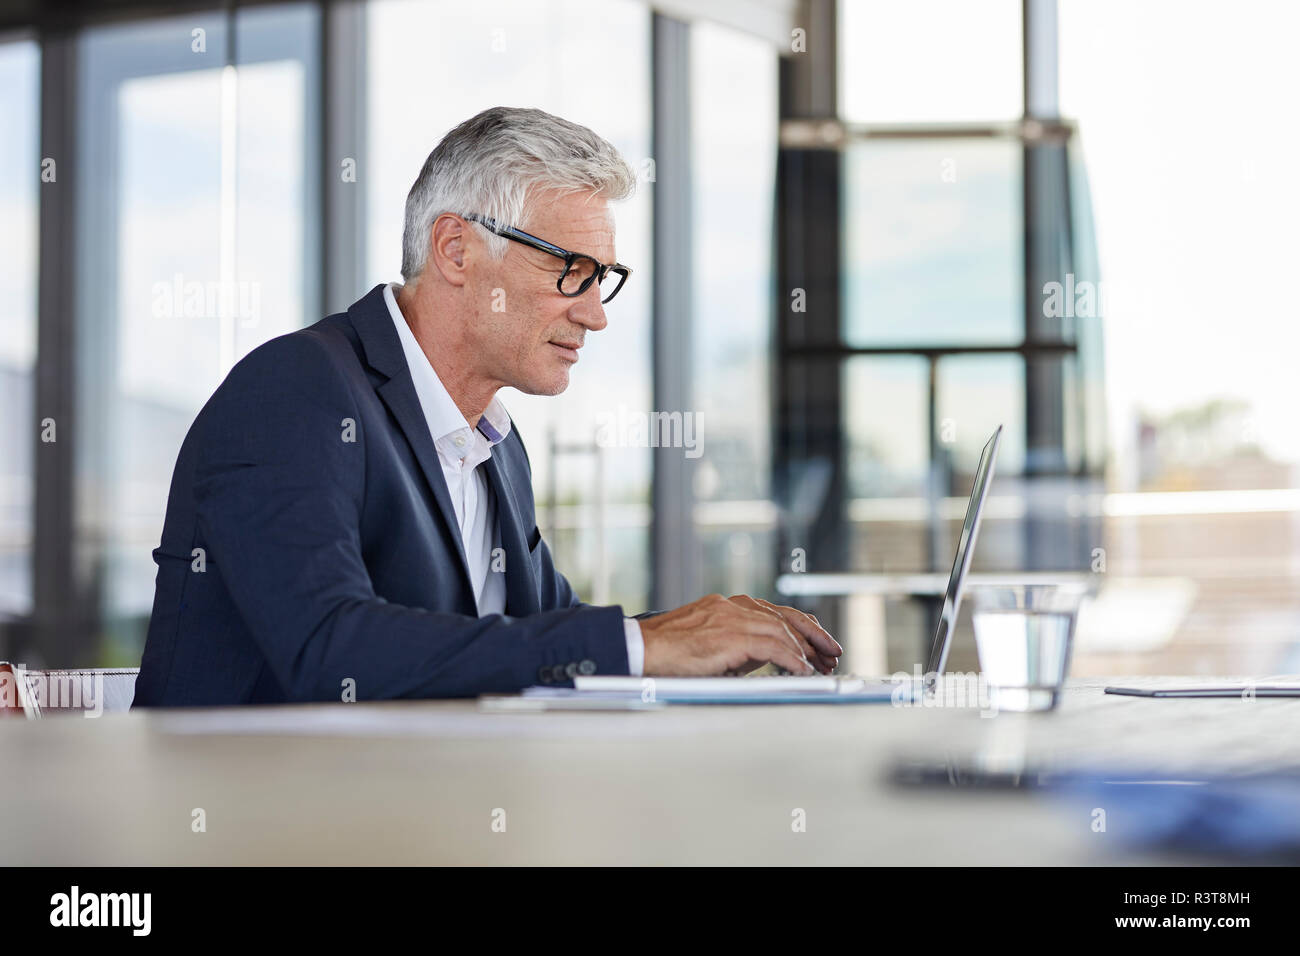 Businessman working in office, using laptop Stock Photo